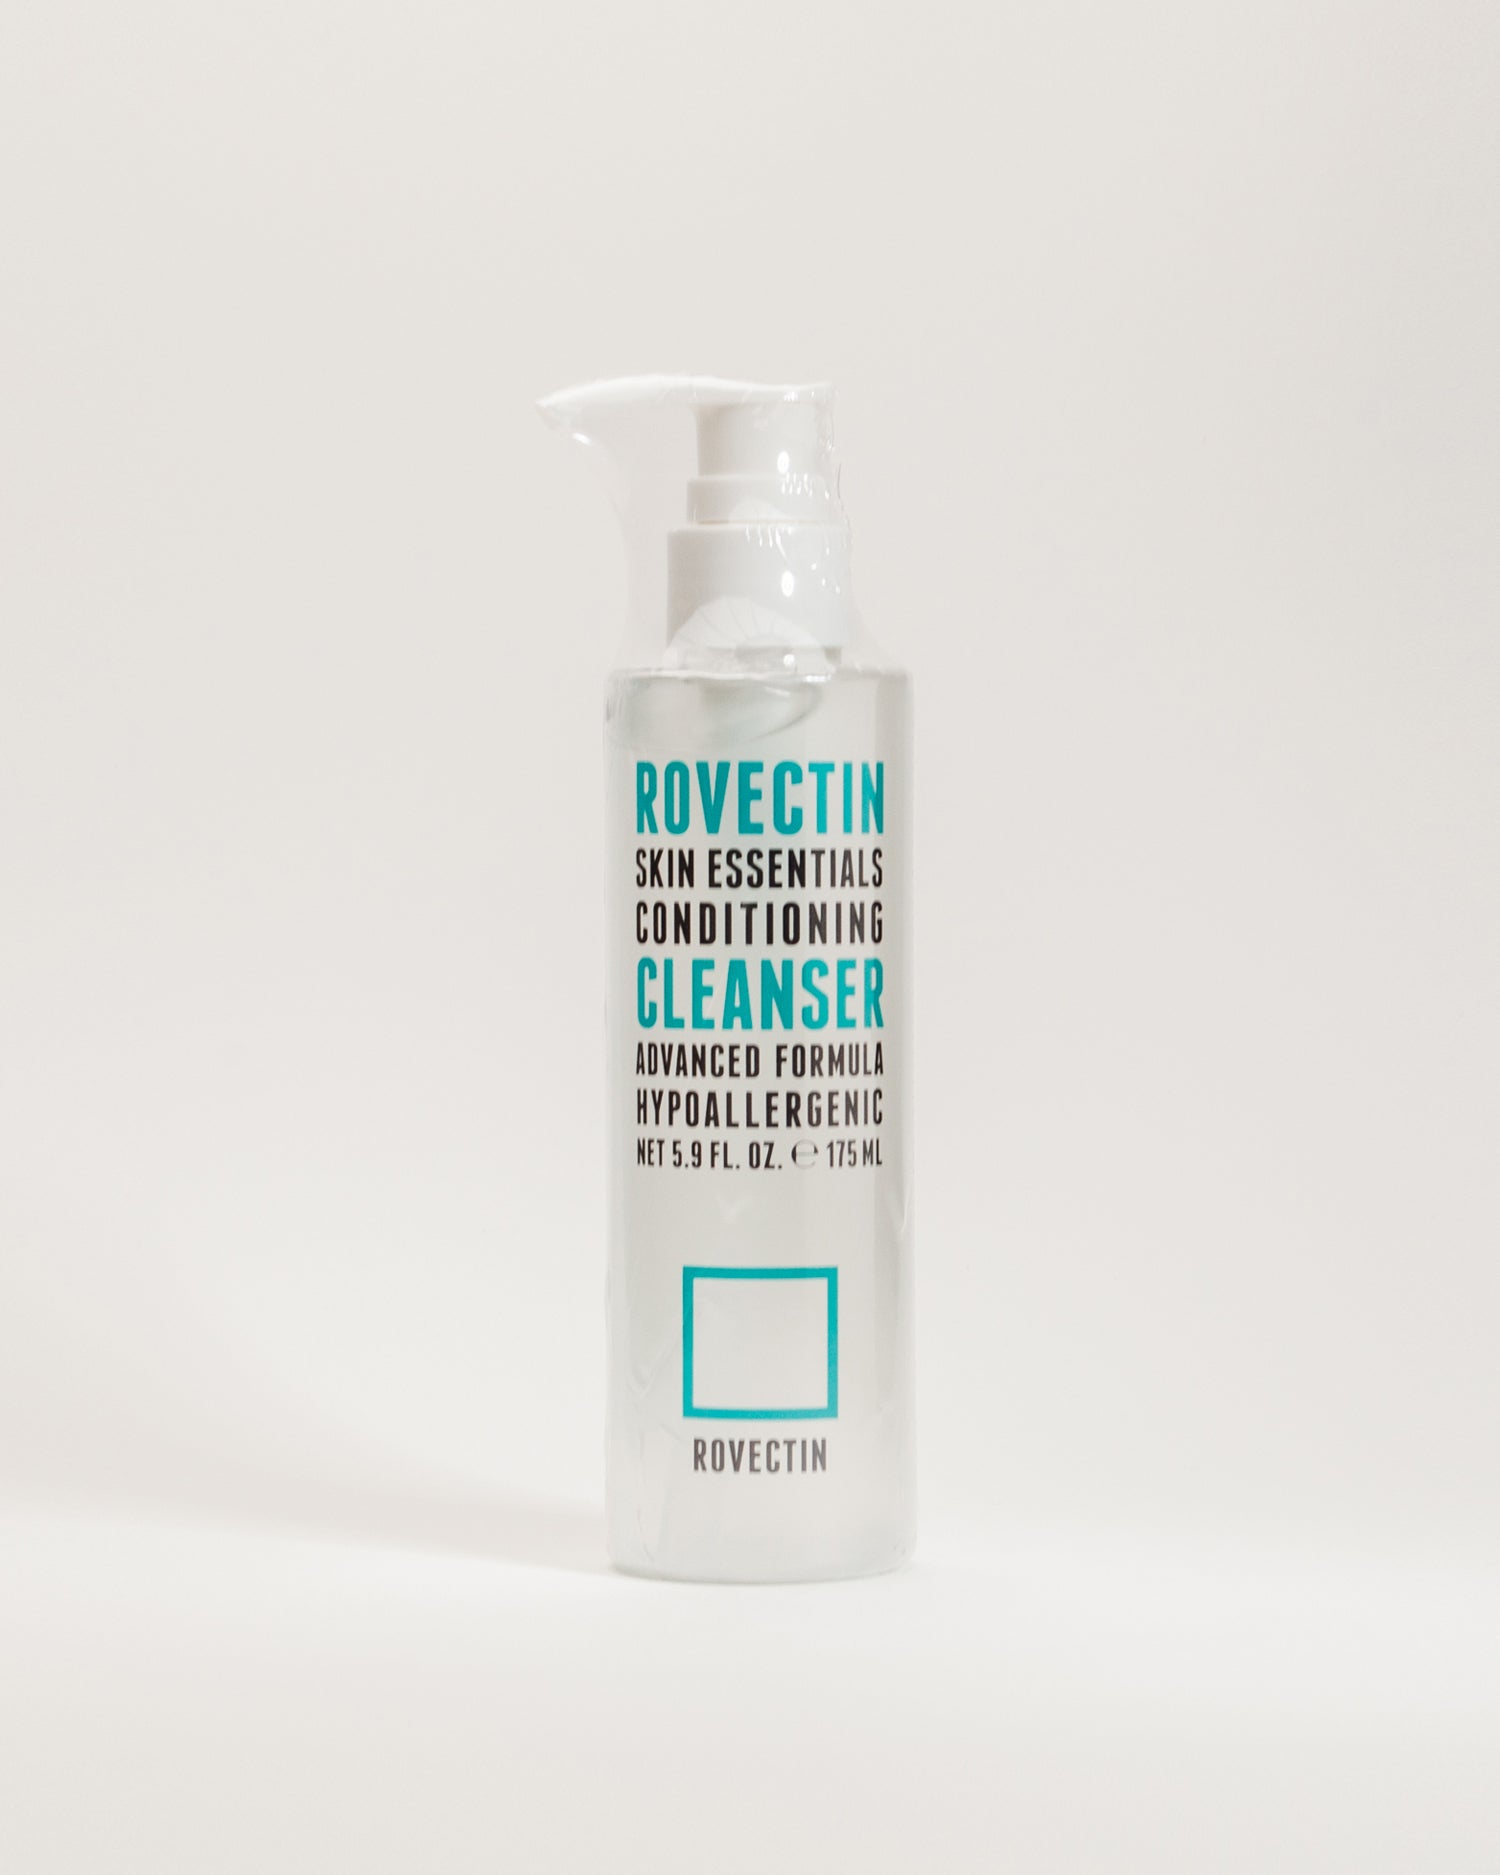 Rovectin	Conditioning Cleanser